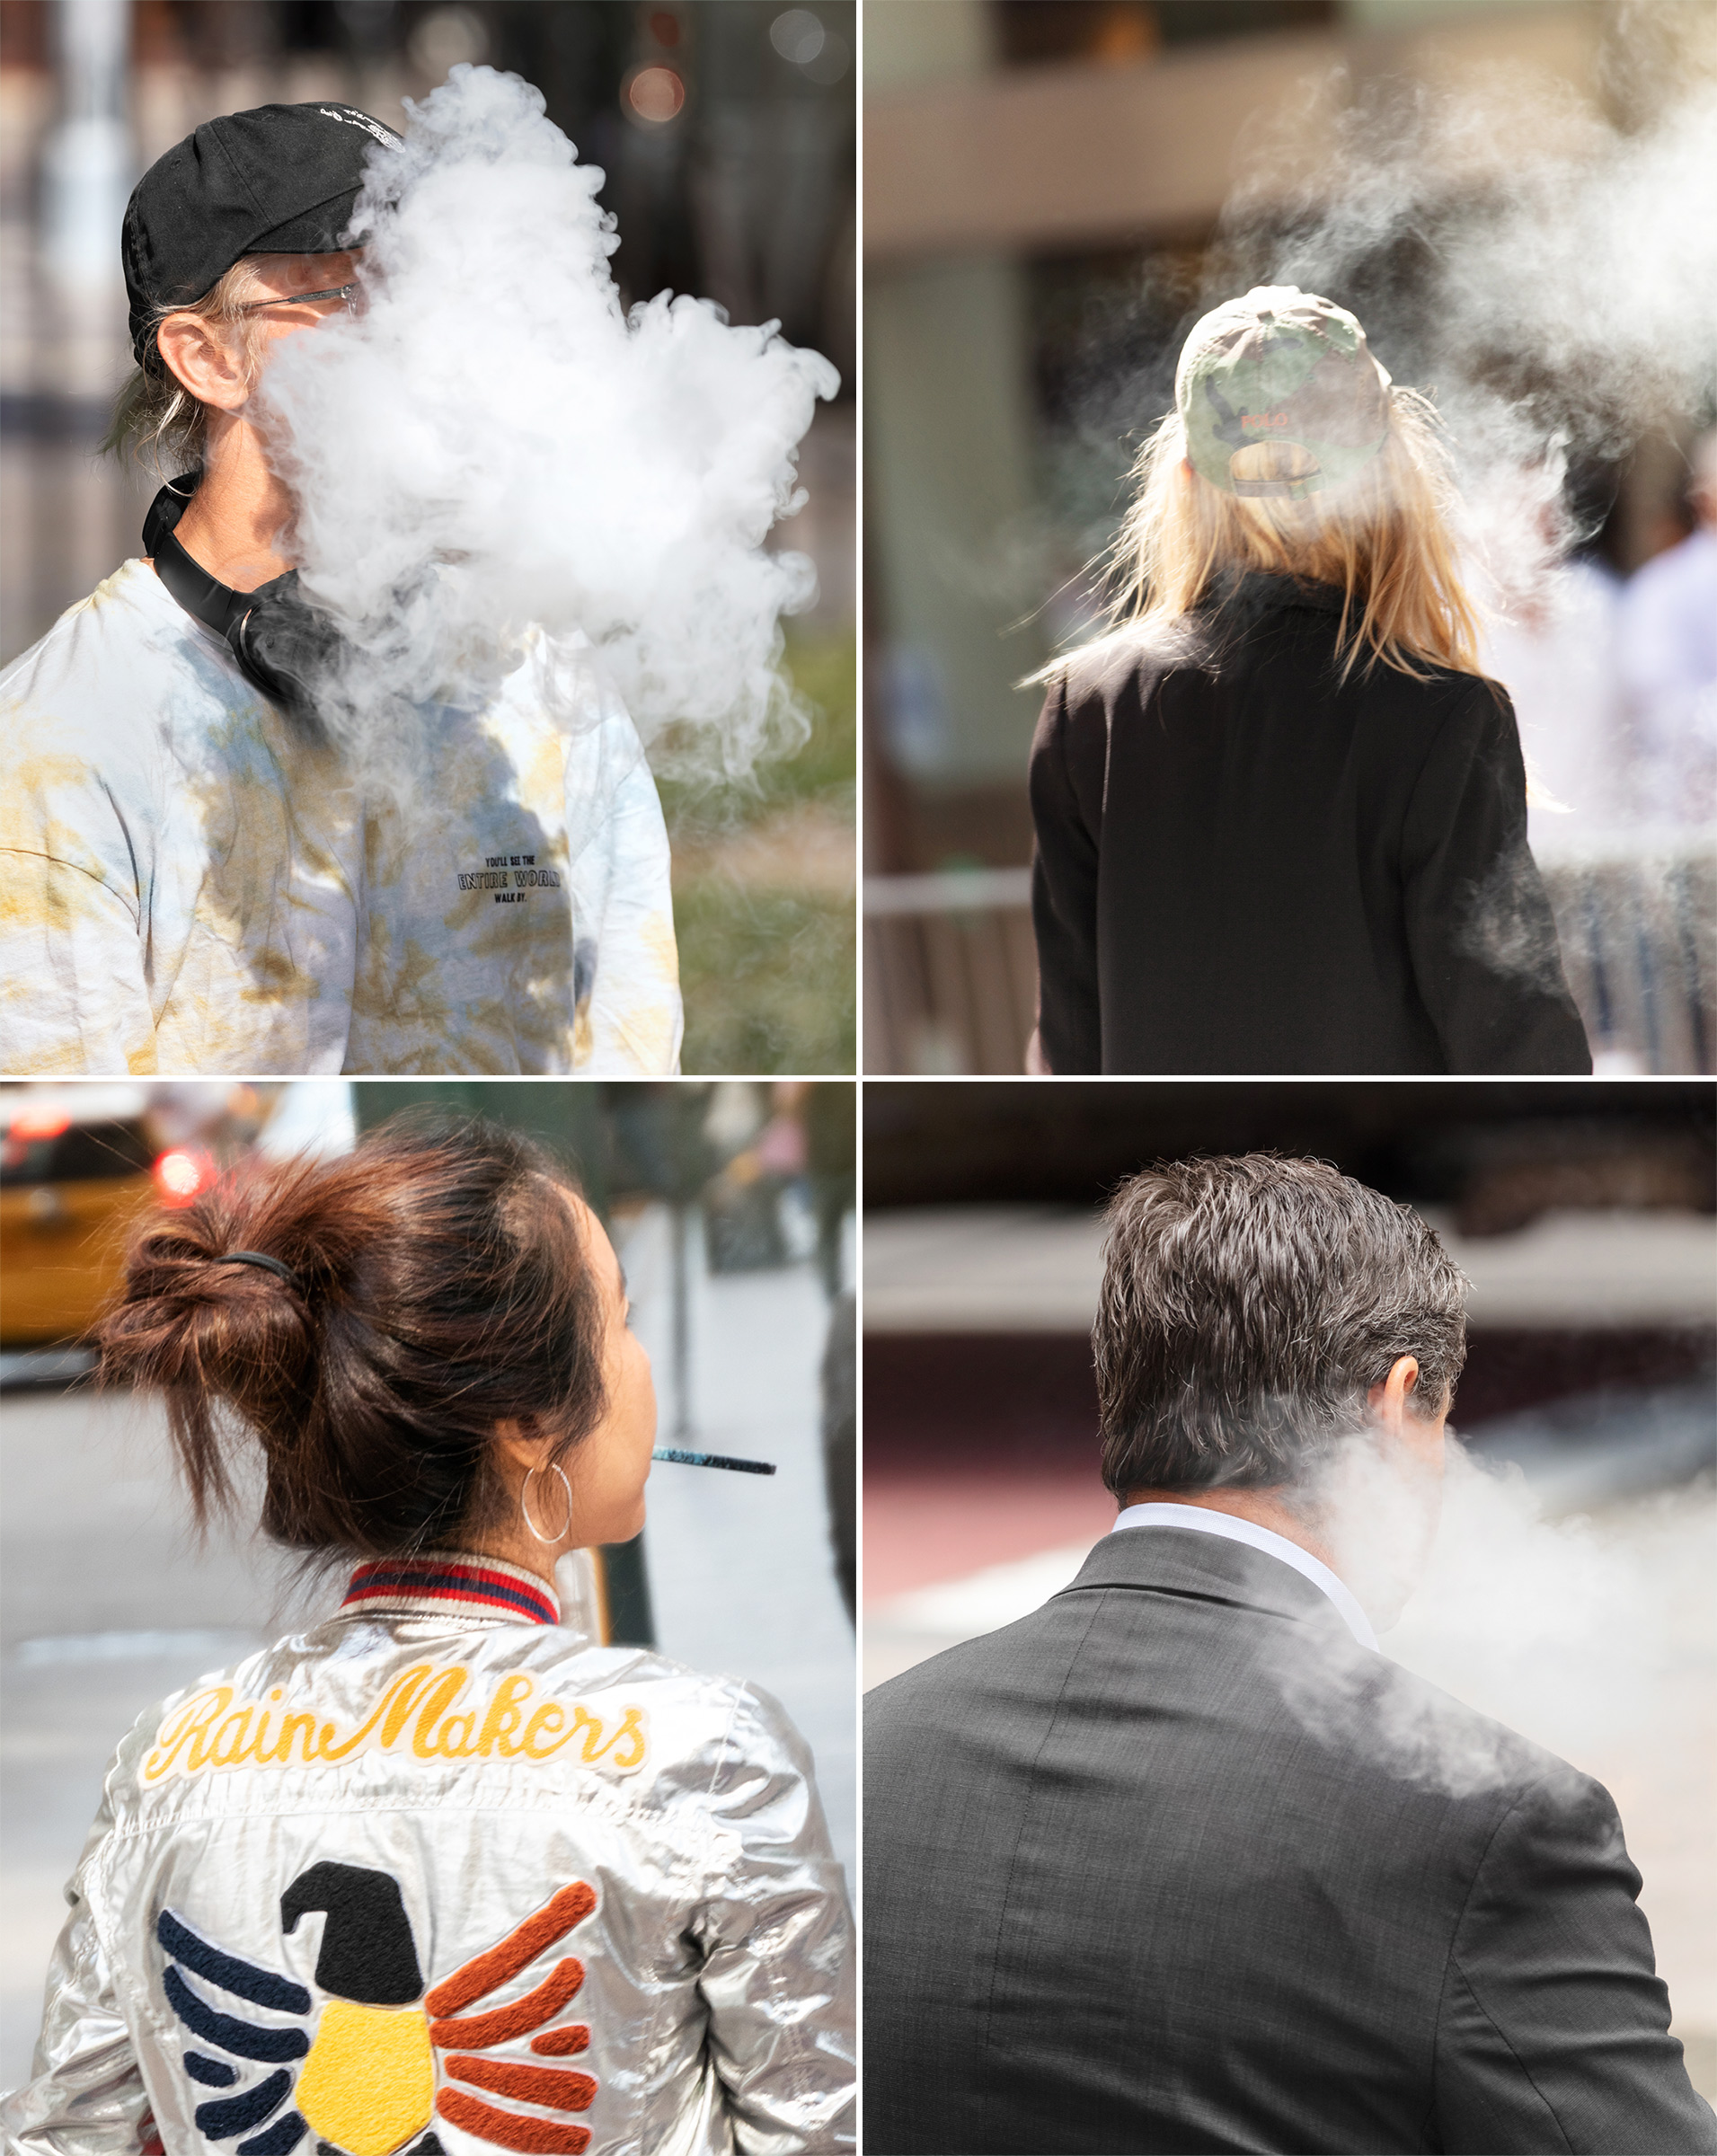 E-cigarettes vaporize a potent liquid packed with nicotine, flavorings and other chemicals (Photographs by Chris Maggio for TIME)